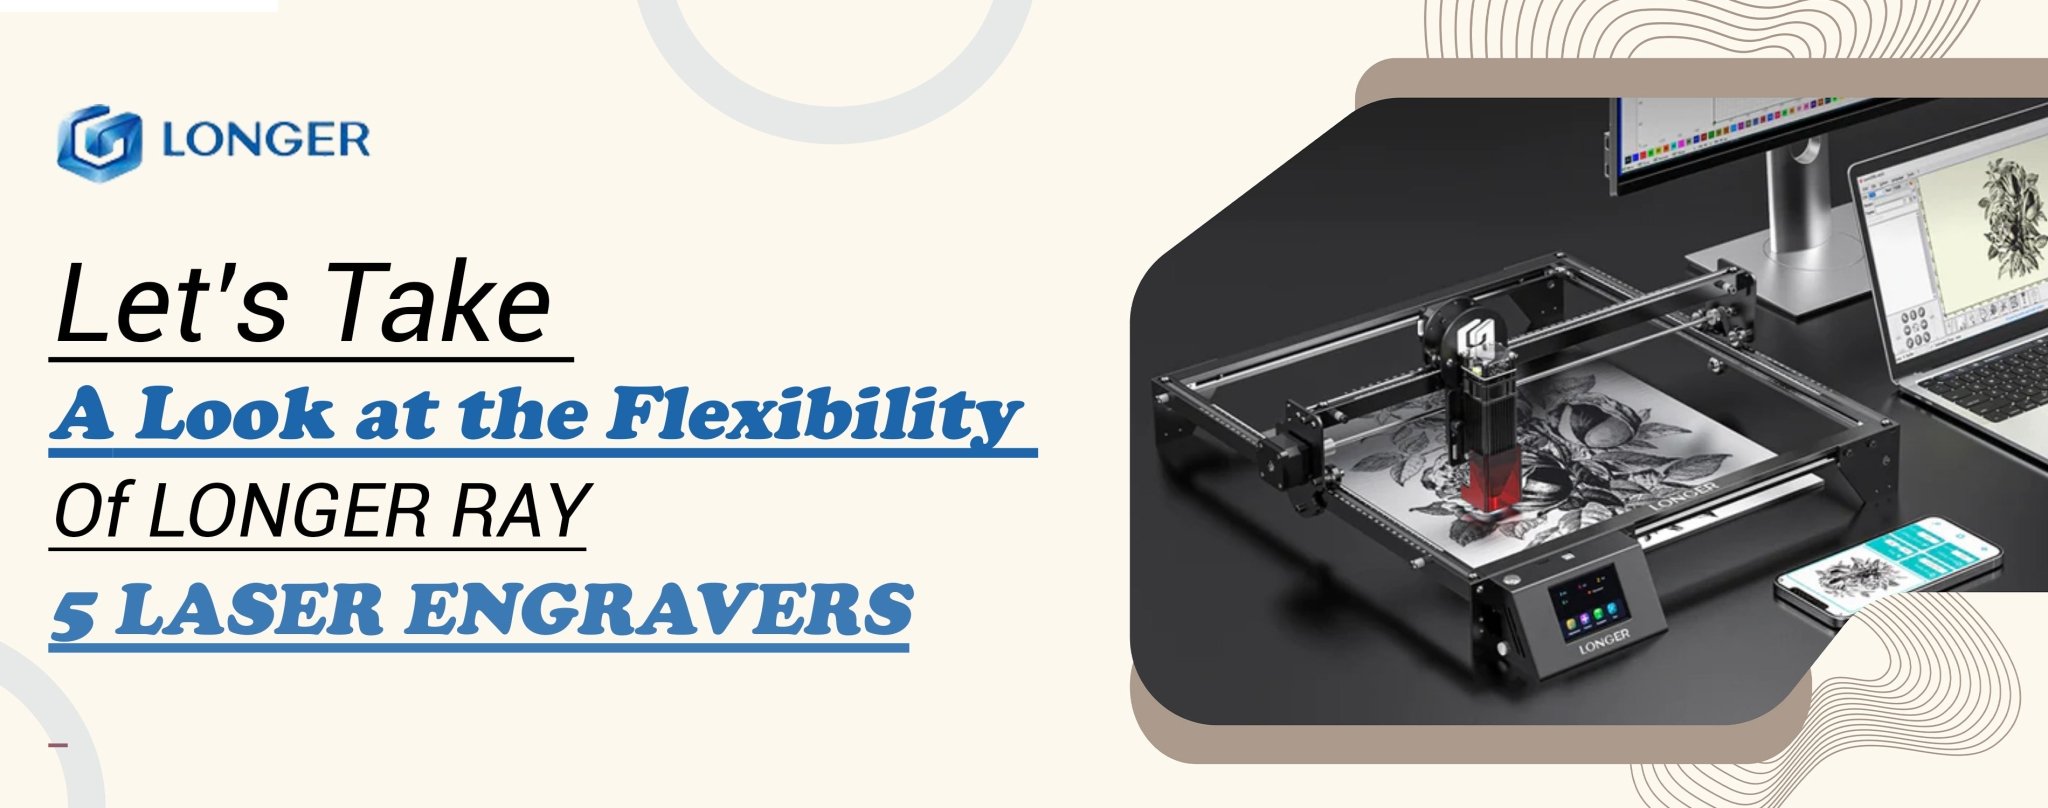 Let’s Take a Look at the Flexibility of LONGER RAY 5 Laser Engravers - LONGER